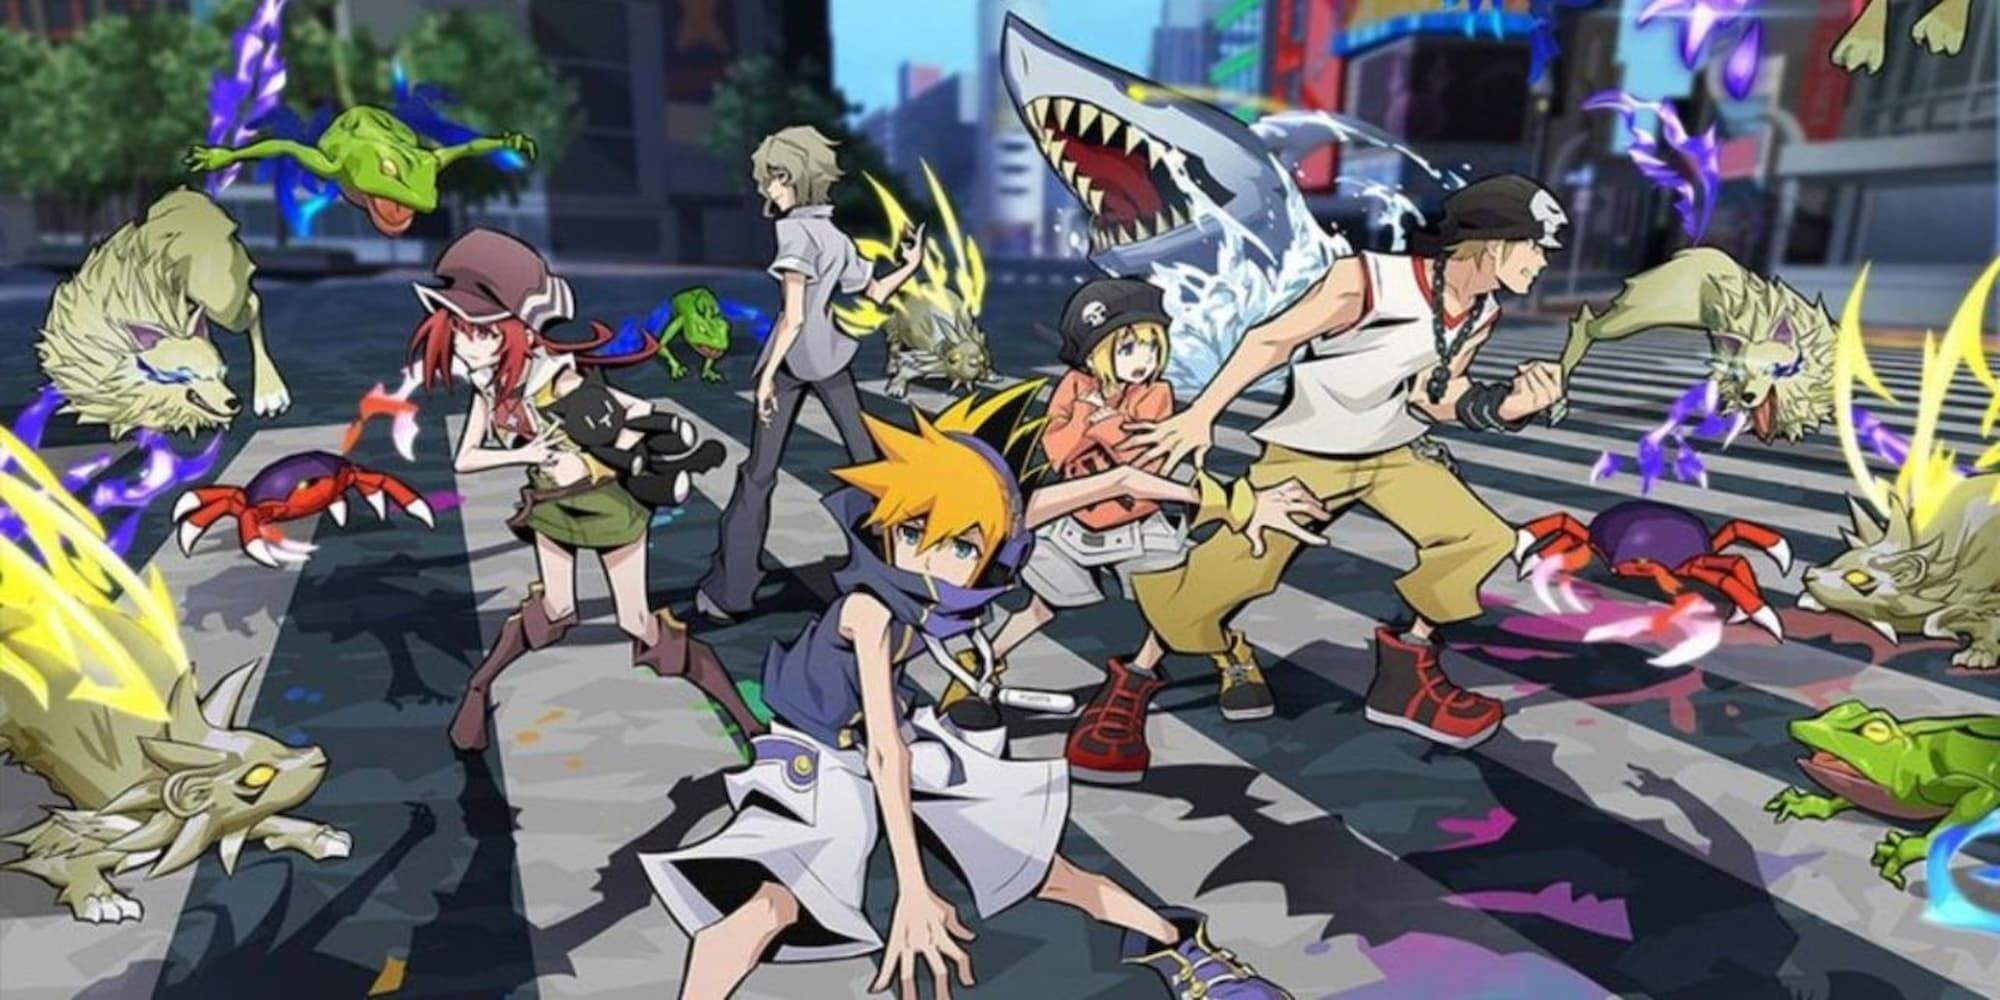 The Cast Of The World Ends With You Surrounded By Noise 